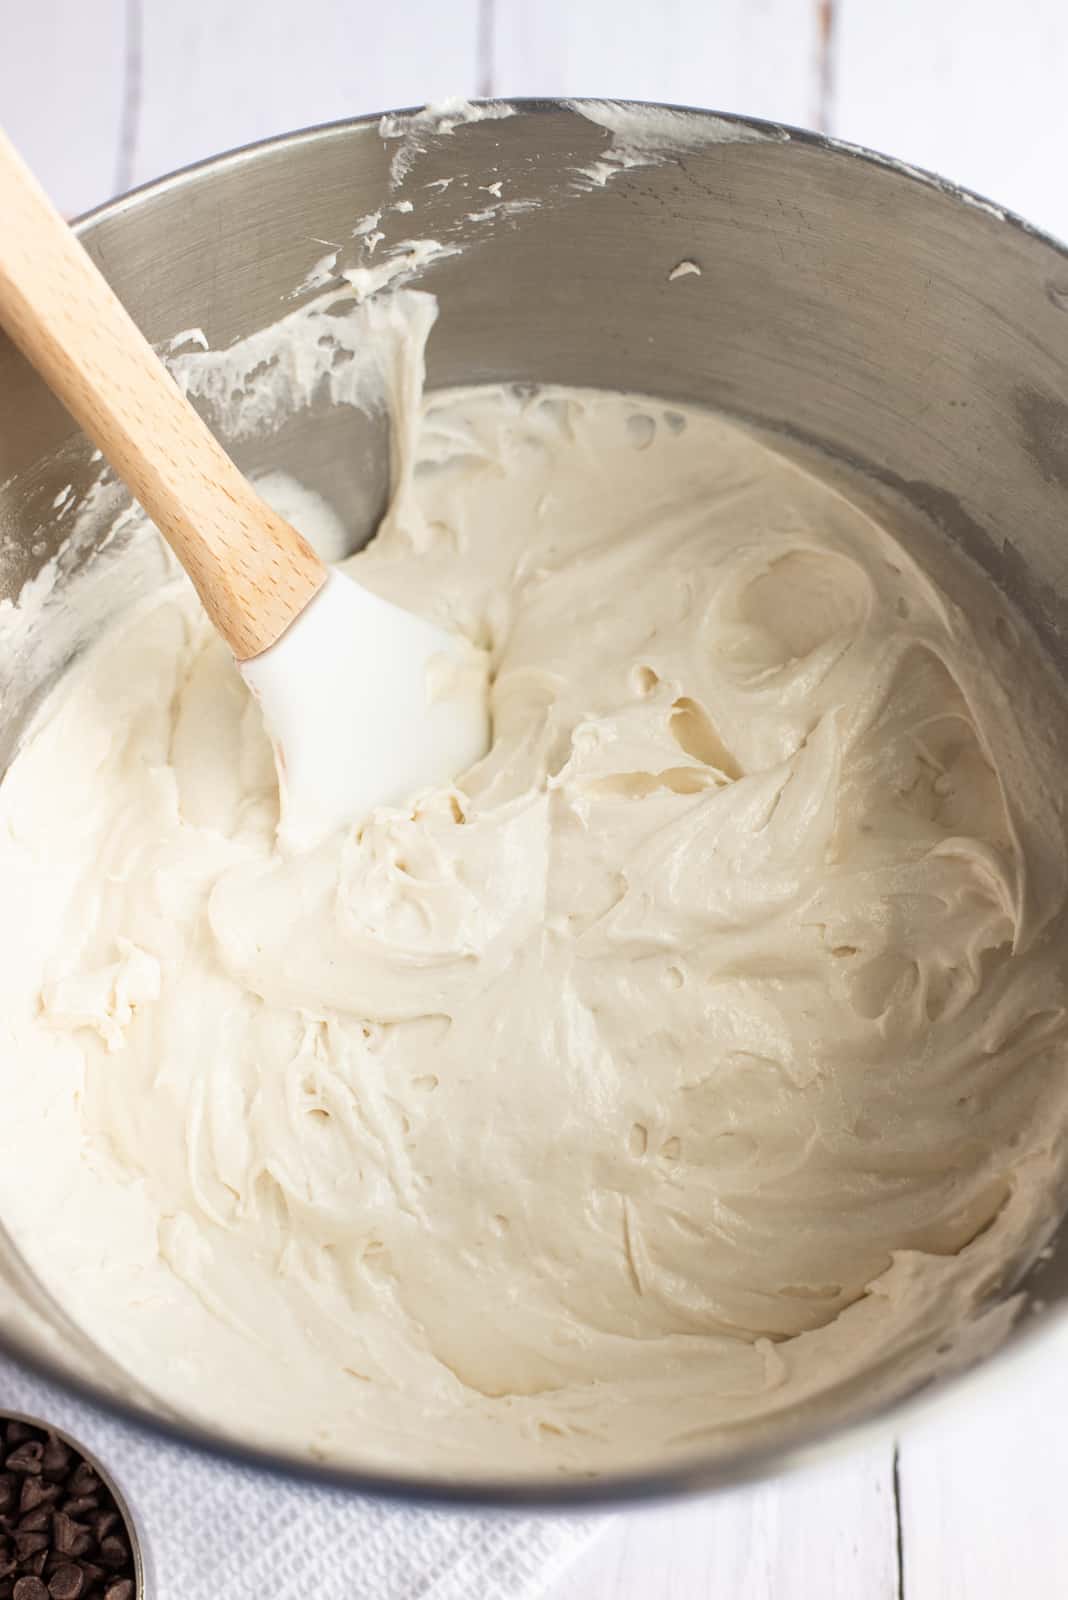 Egg white added to bar batter in stand mixer and mixed.